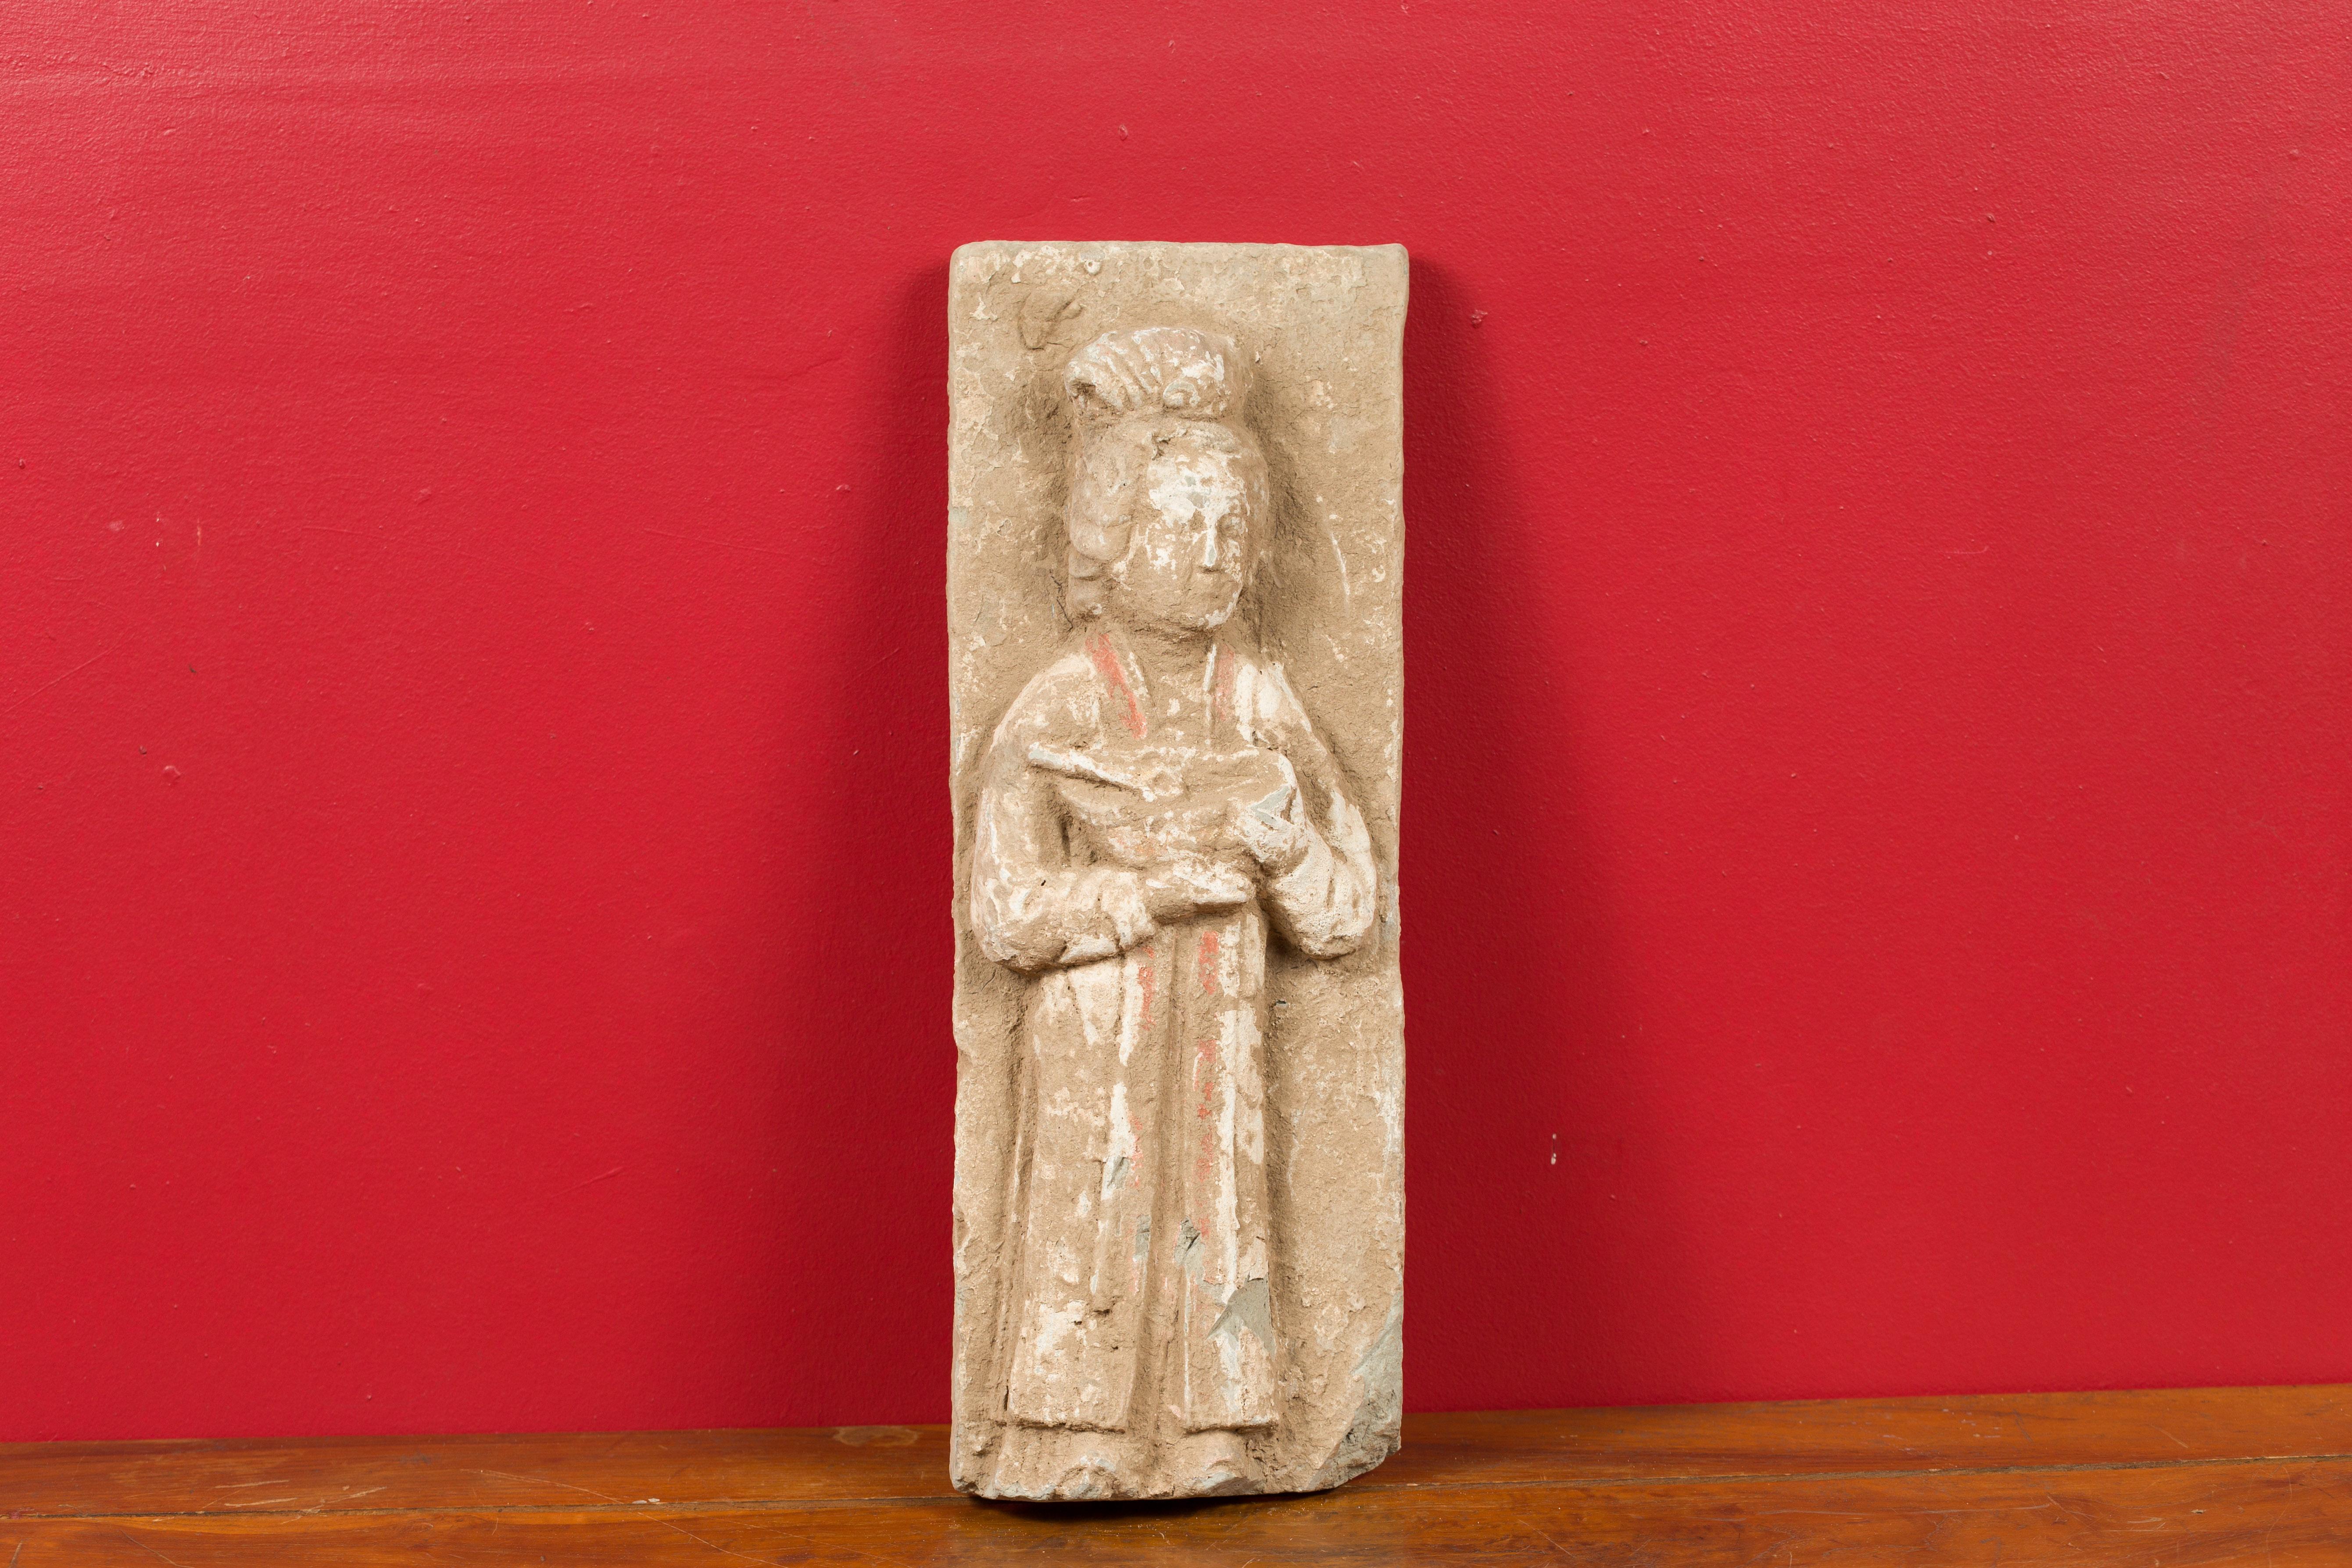 A Chinese Han Dynasty wall plaque depicting a woman carrying a dish, circa 202 BC-200 AD. Created in China during the prestigious Han Dynasty, this wall plaque attracts our attention with its skillful depiction and nicely weathered appearance